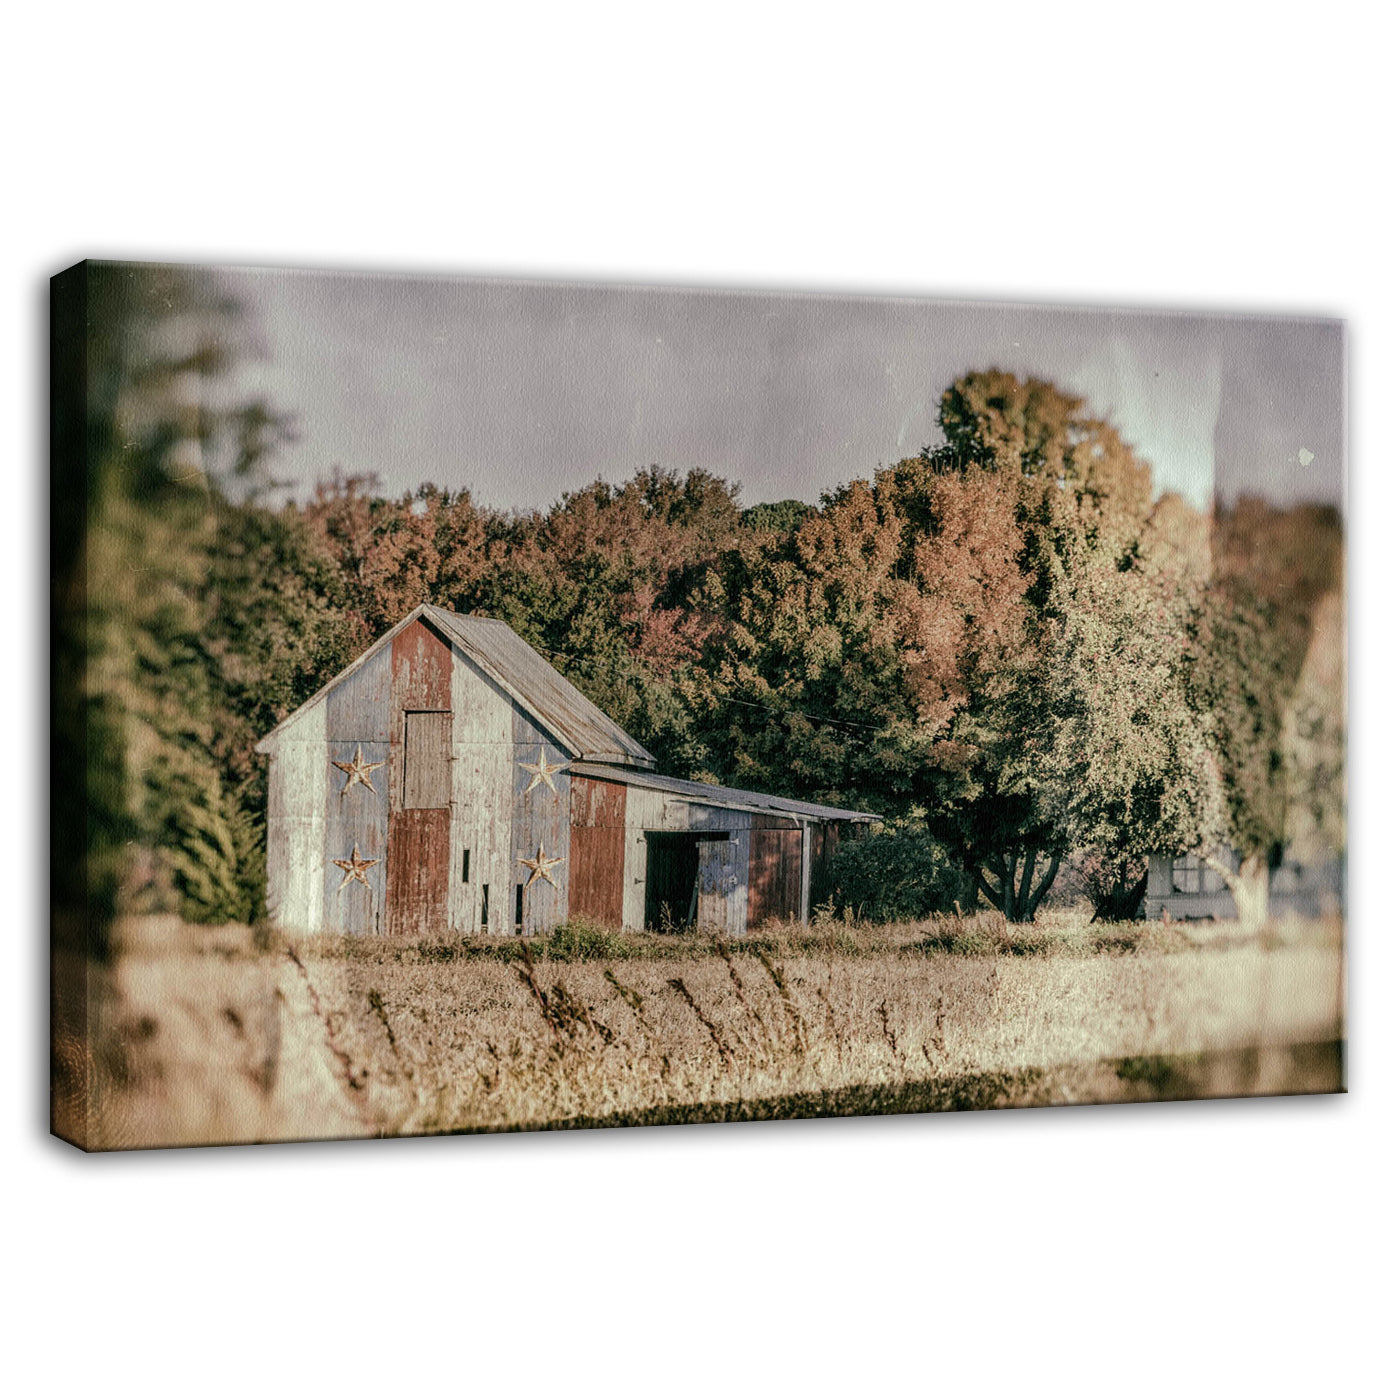 Patriotic Weathered Barn in Field Glass Plate Effect Fine Art Canvas Wall Art Prints  - PIPAFINEART